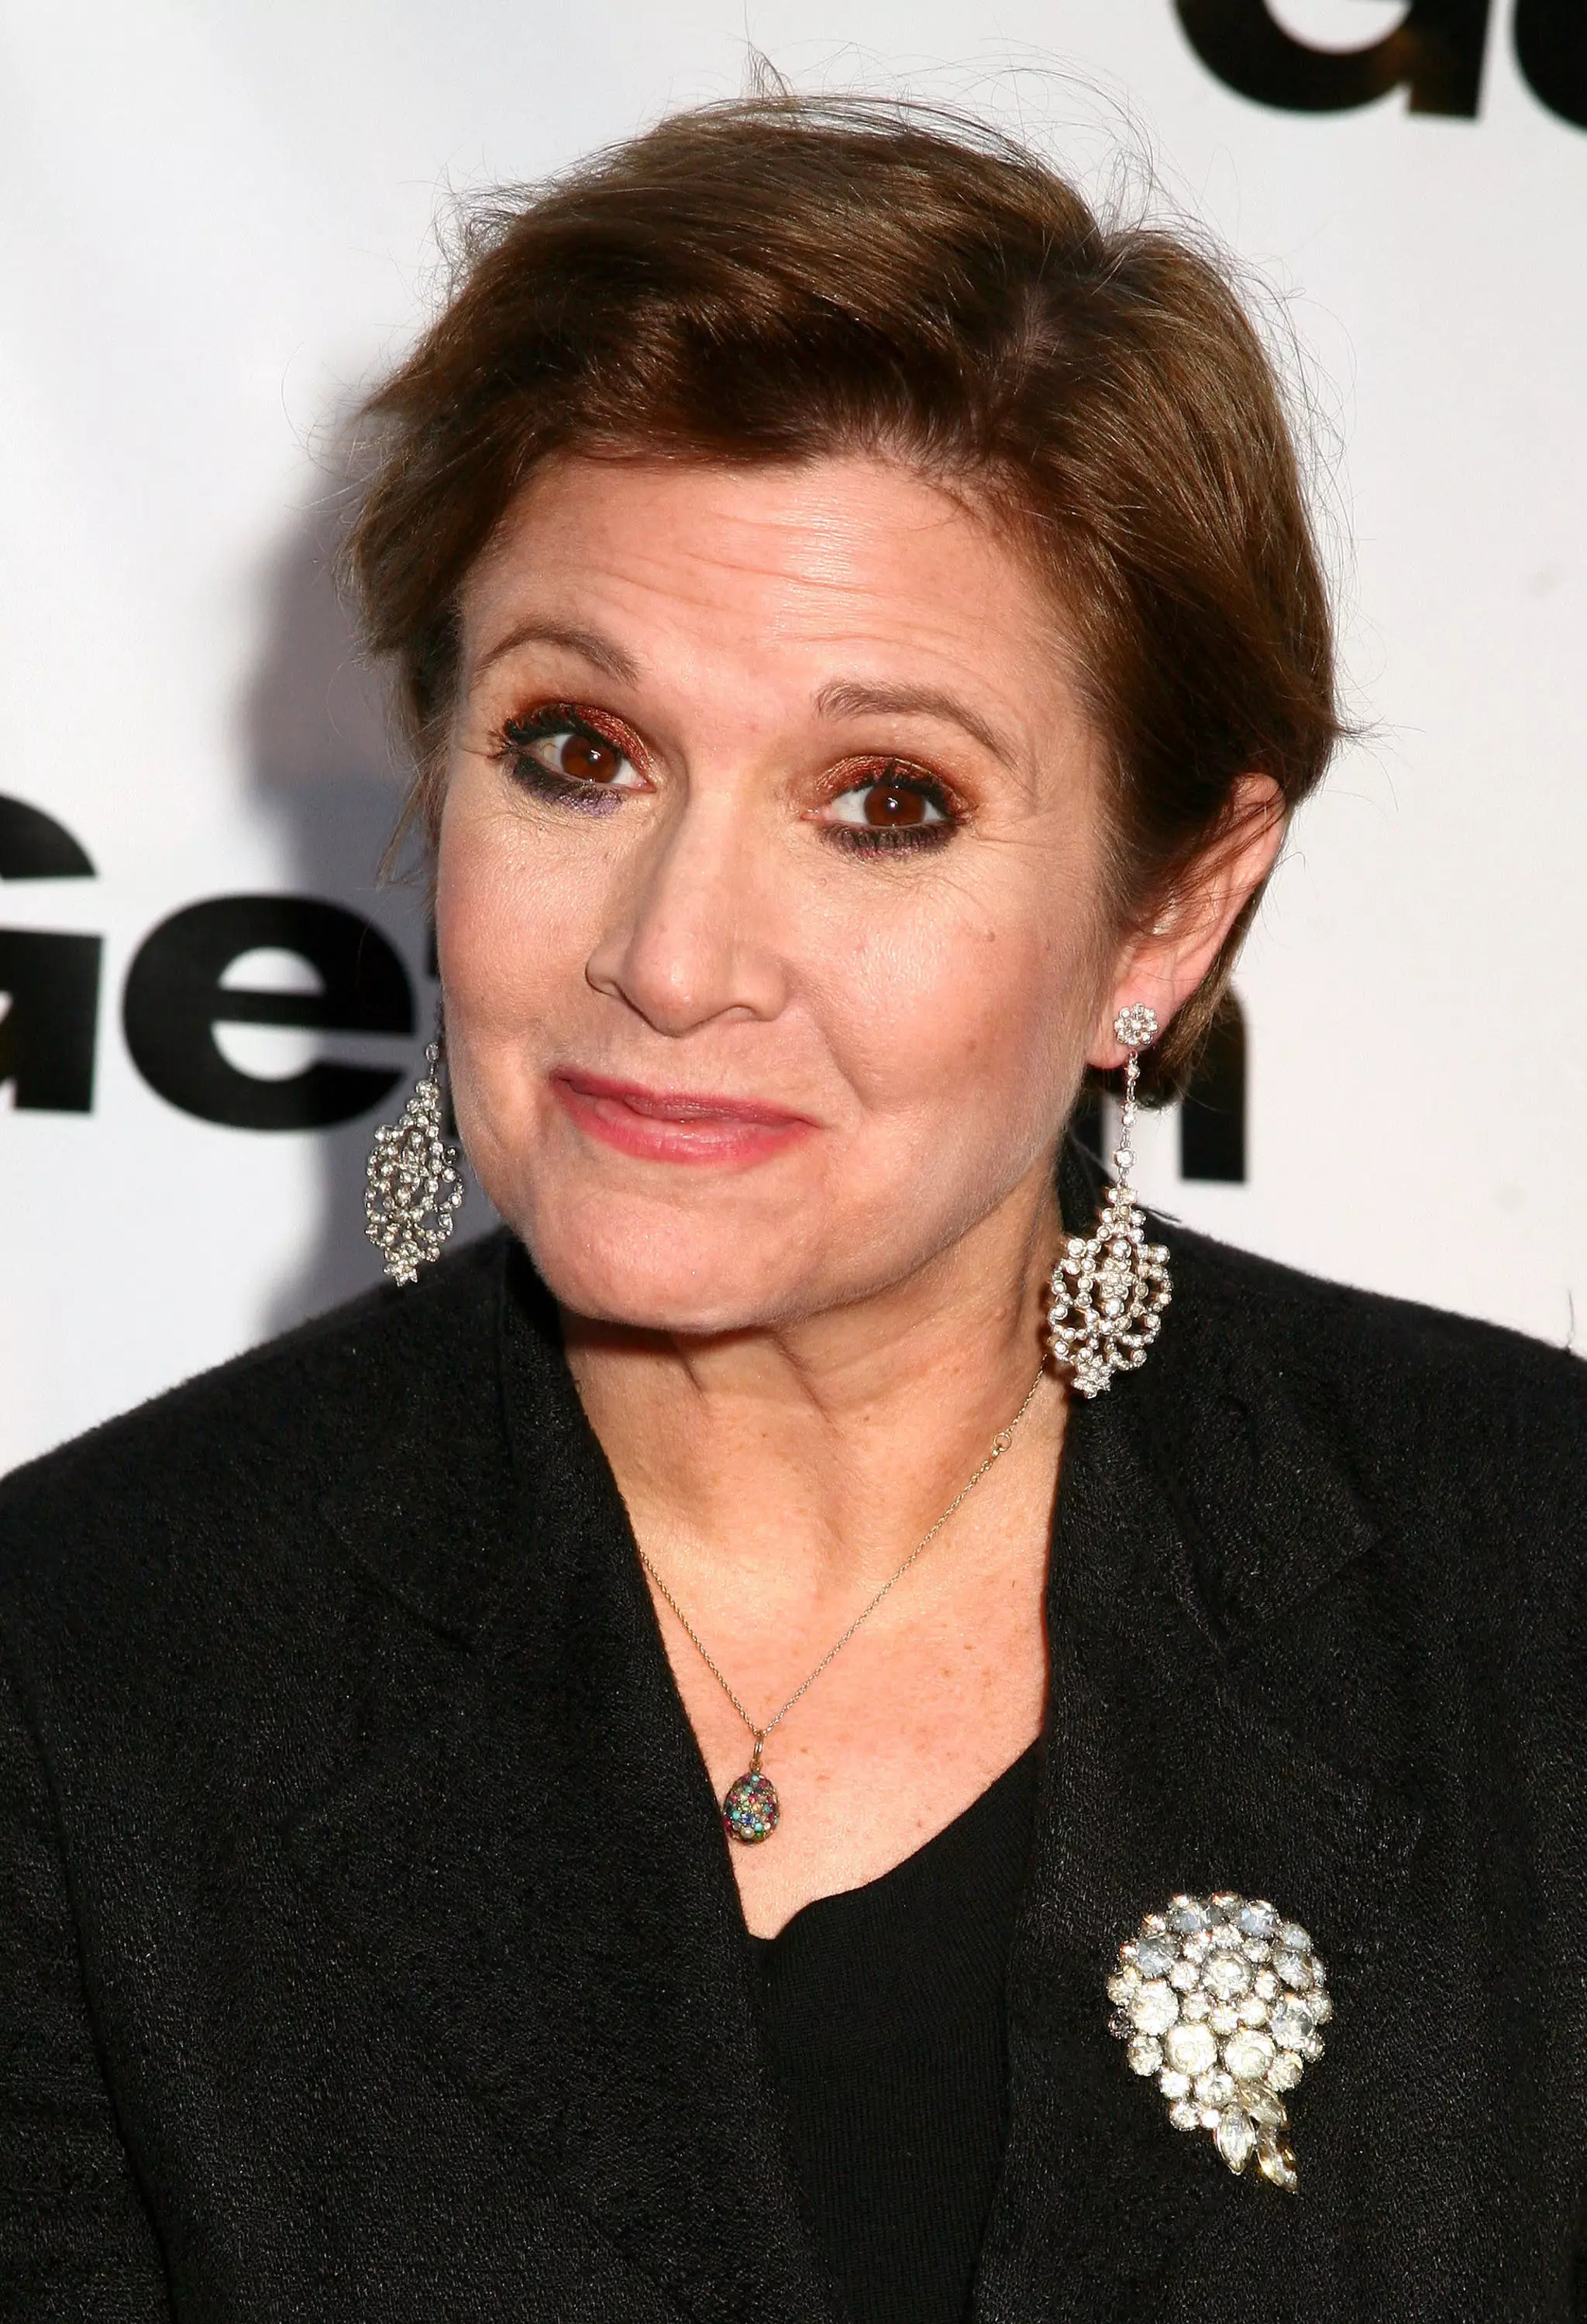 Carrie Fisher was hosting the gathering.